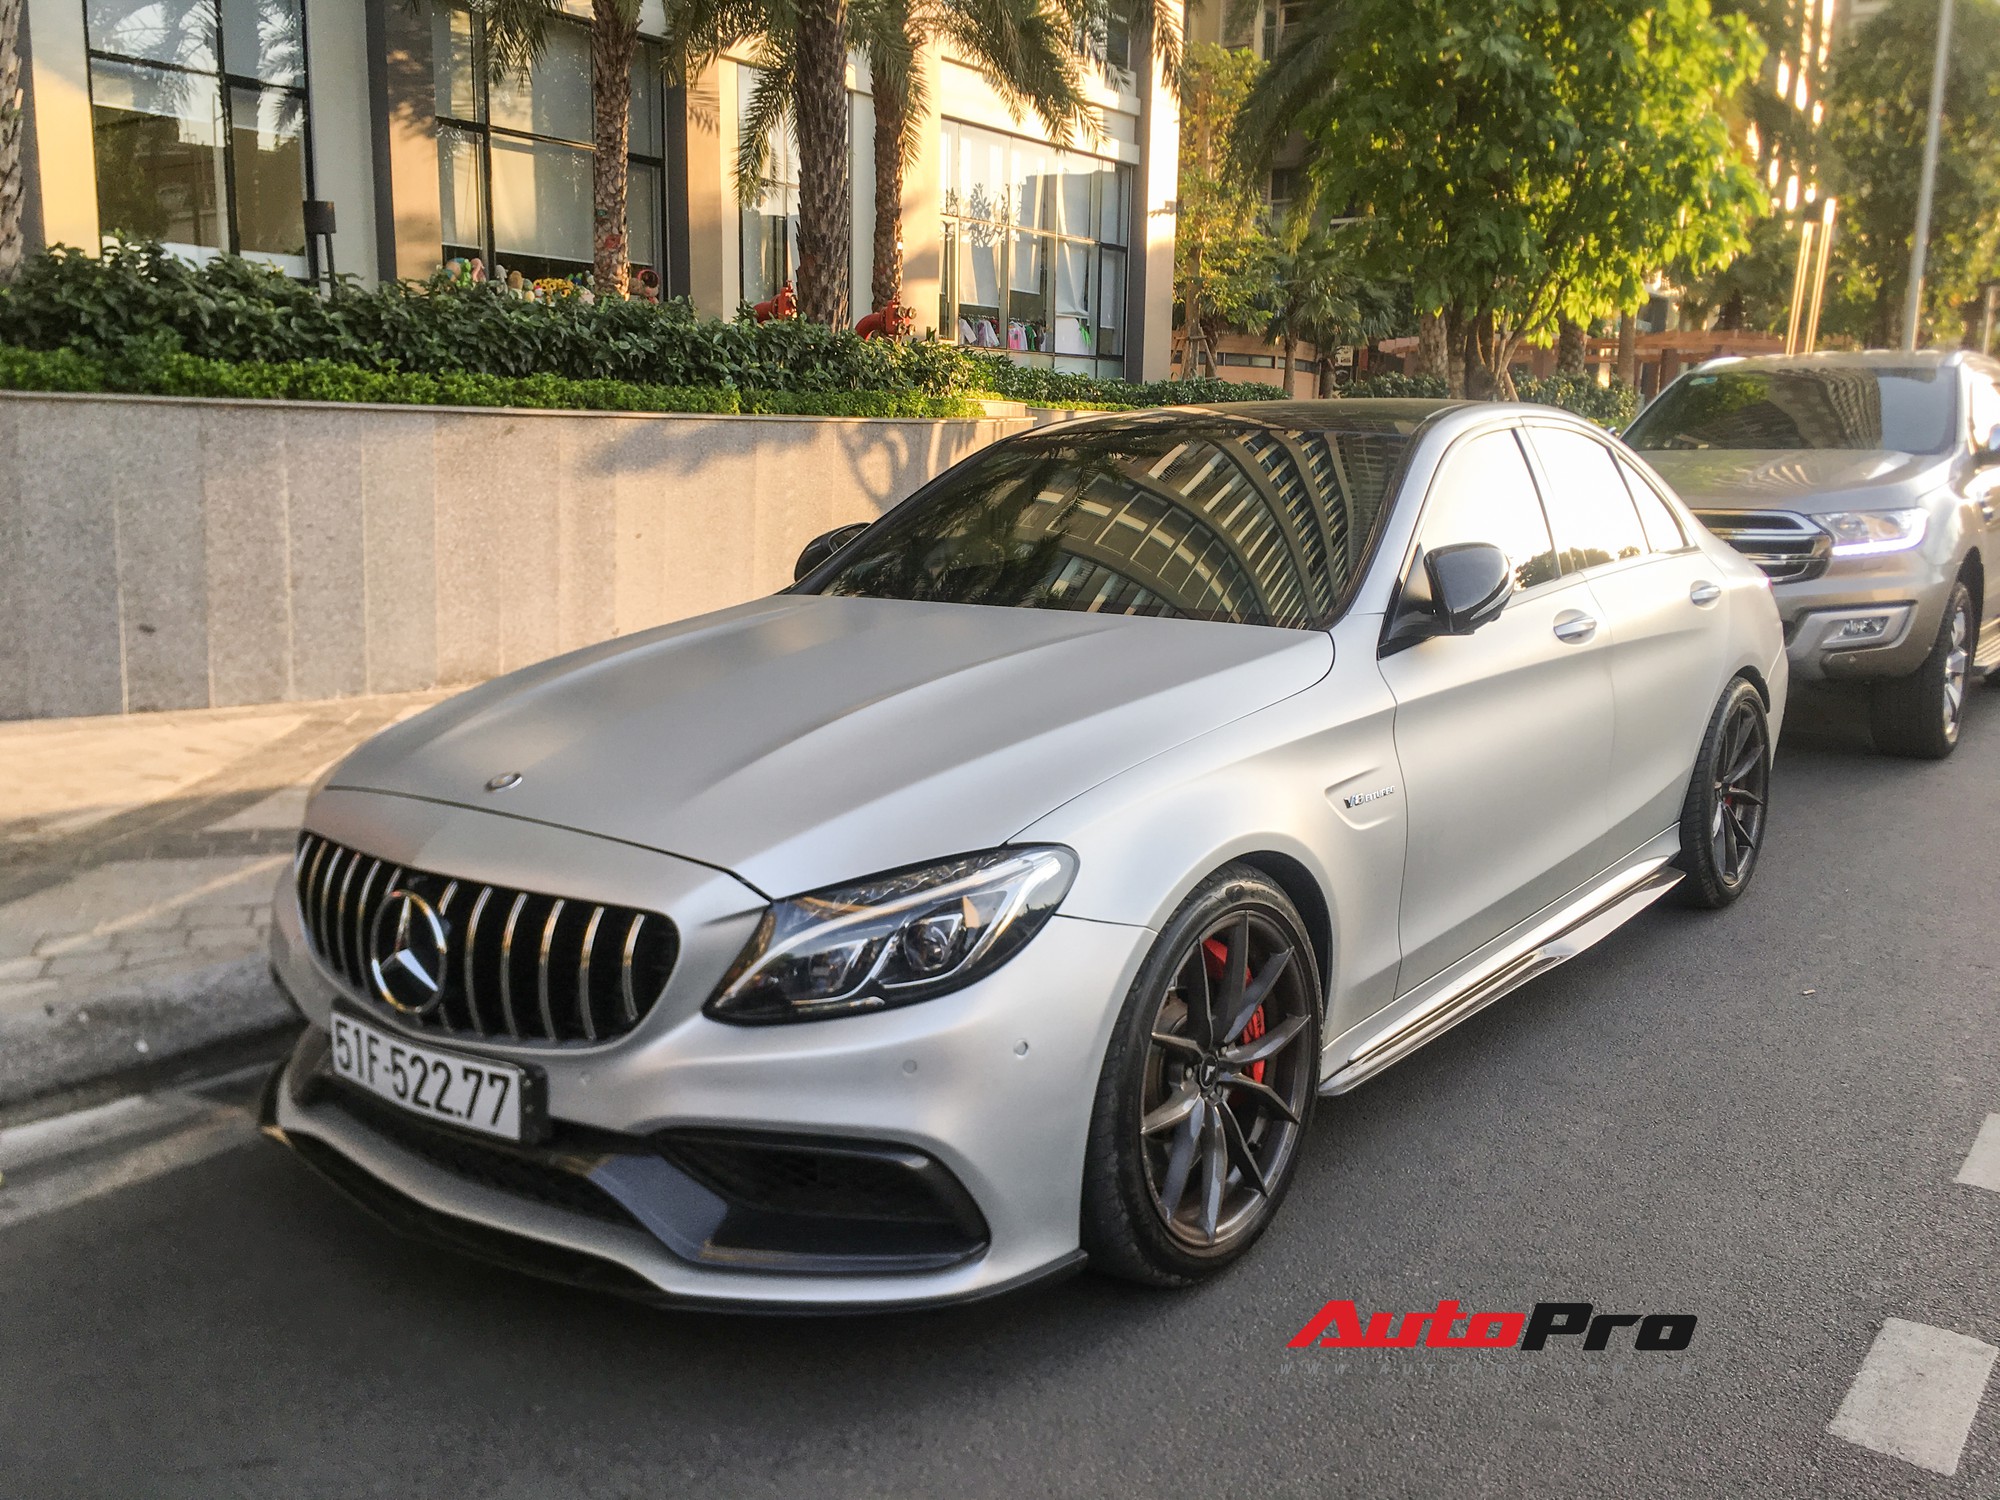 The Luxury MUSCLE CAR  2020 MercedesAMG C63S Coupe Review  YouTube